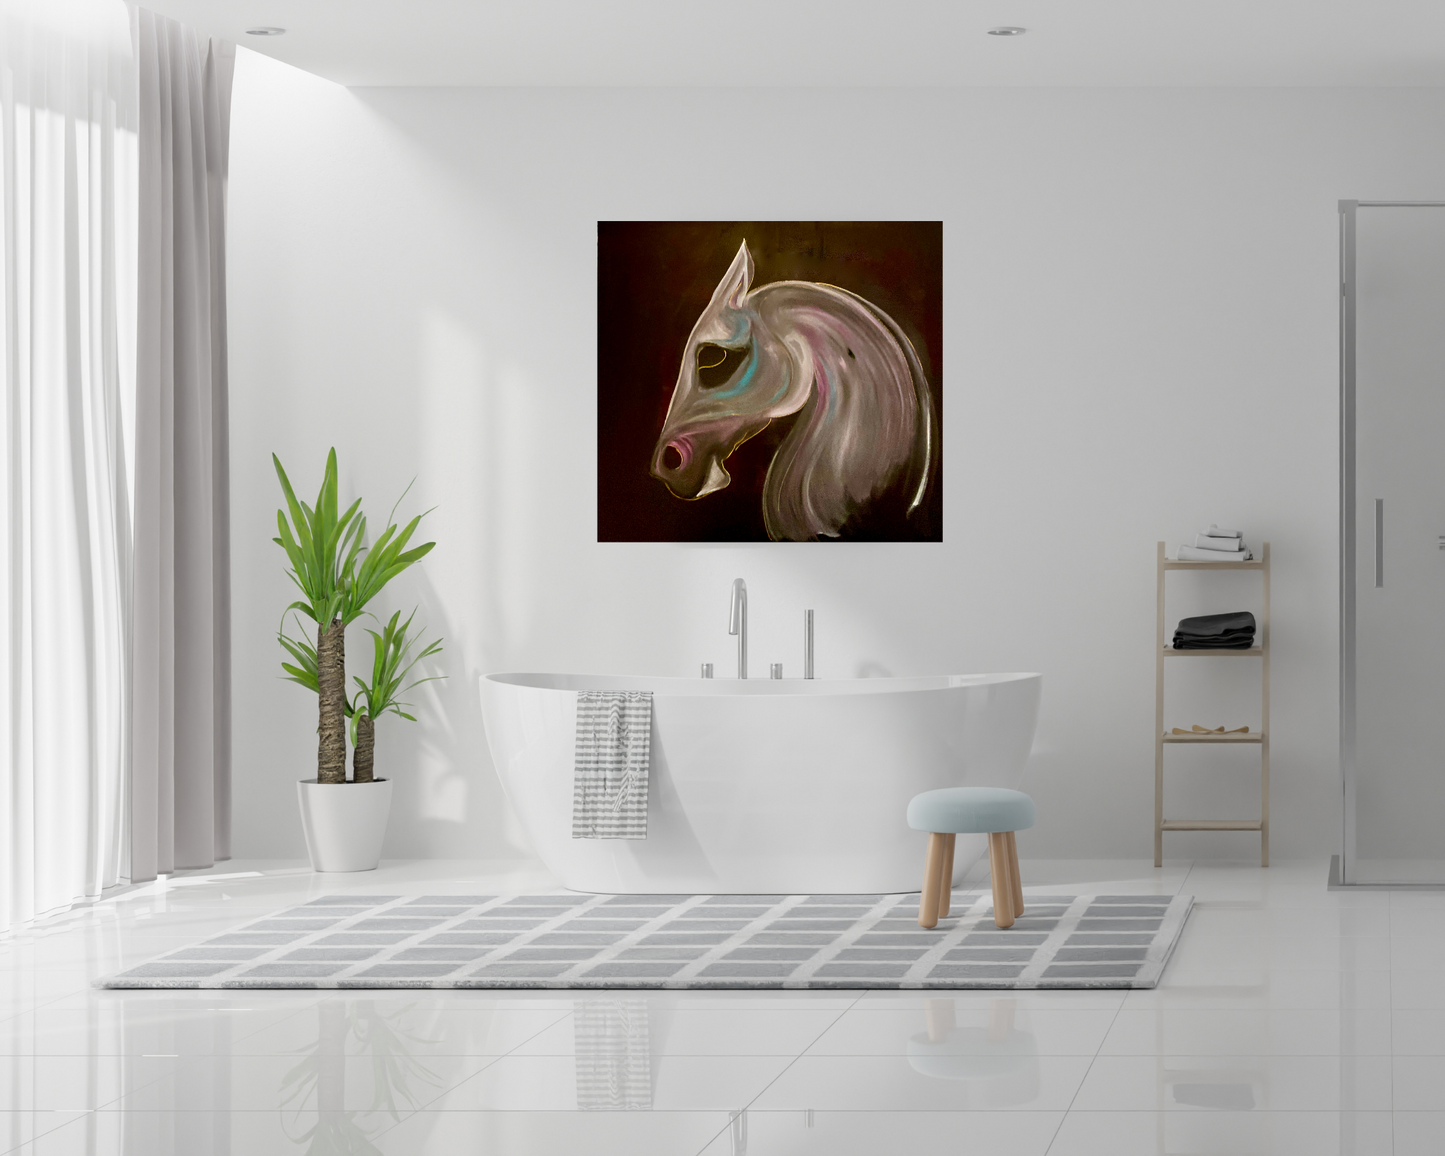 The Horse - SOLD